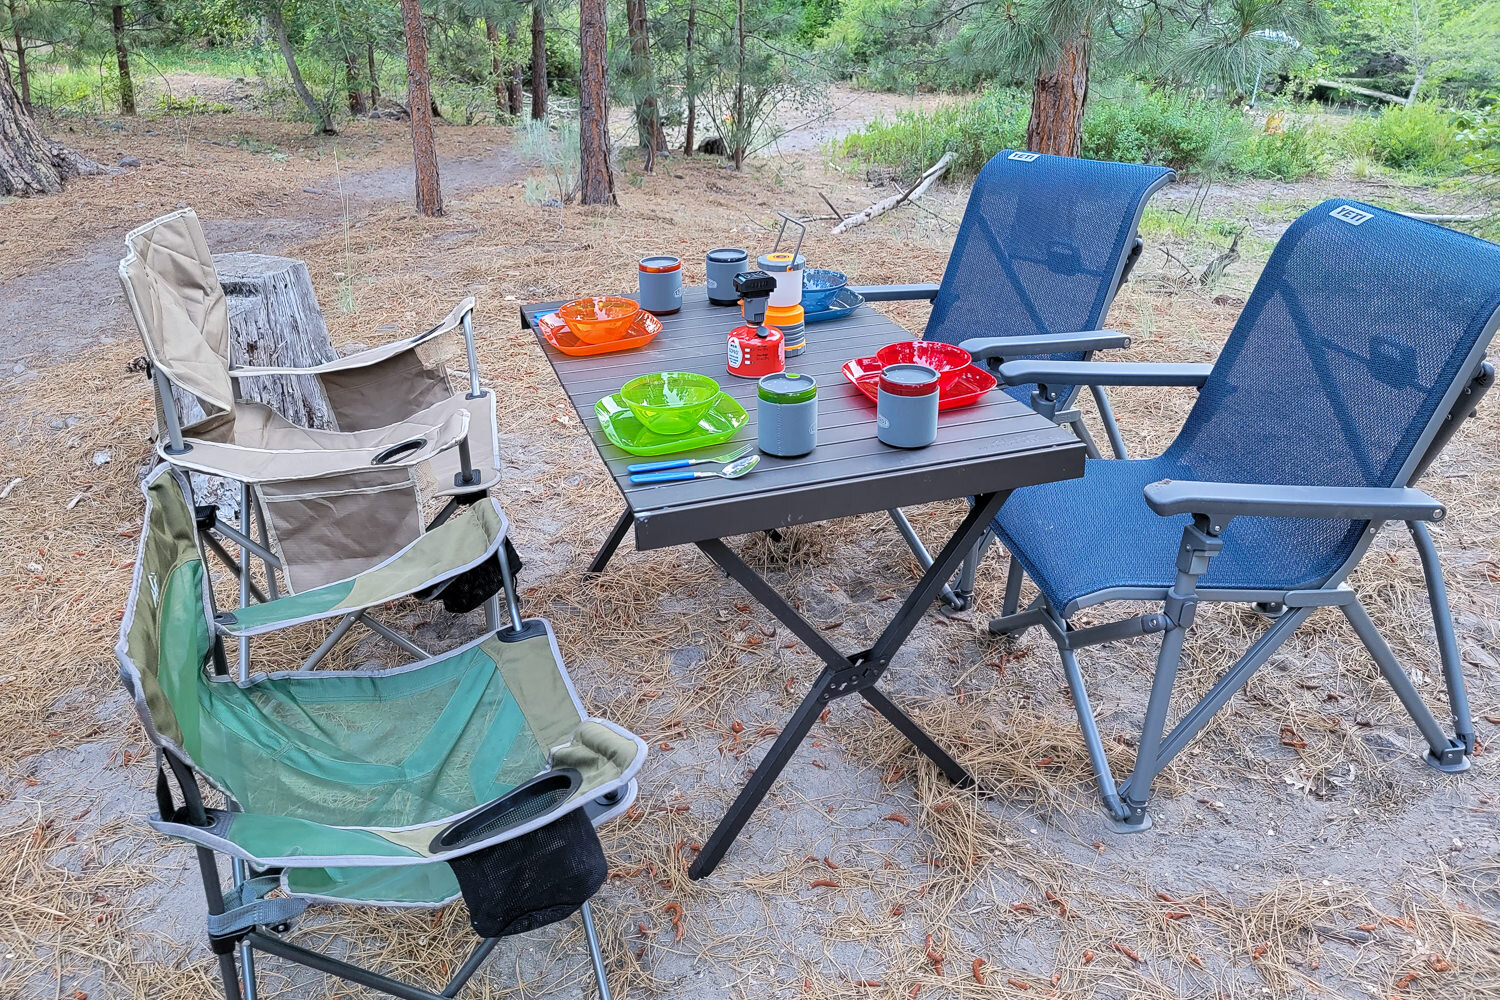 The GSI Outdoor Infinity Deluxe Table Set eliminates the need for single-use dishes & we love that it’s color-coded